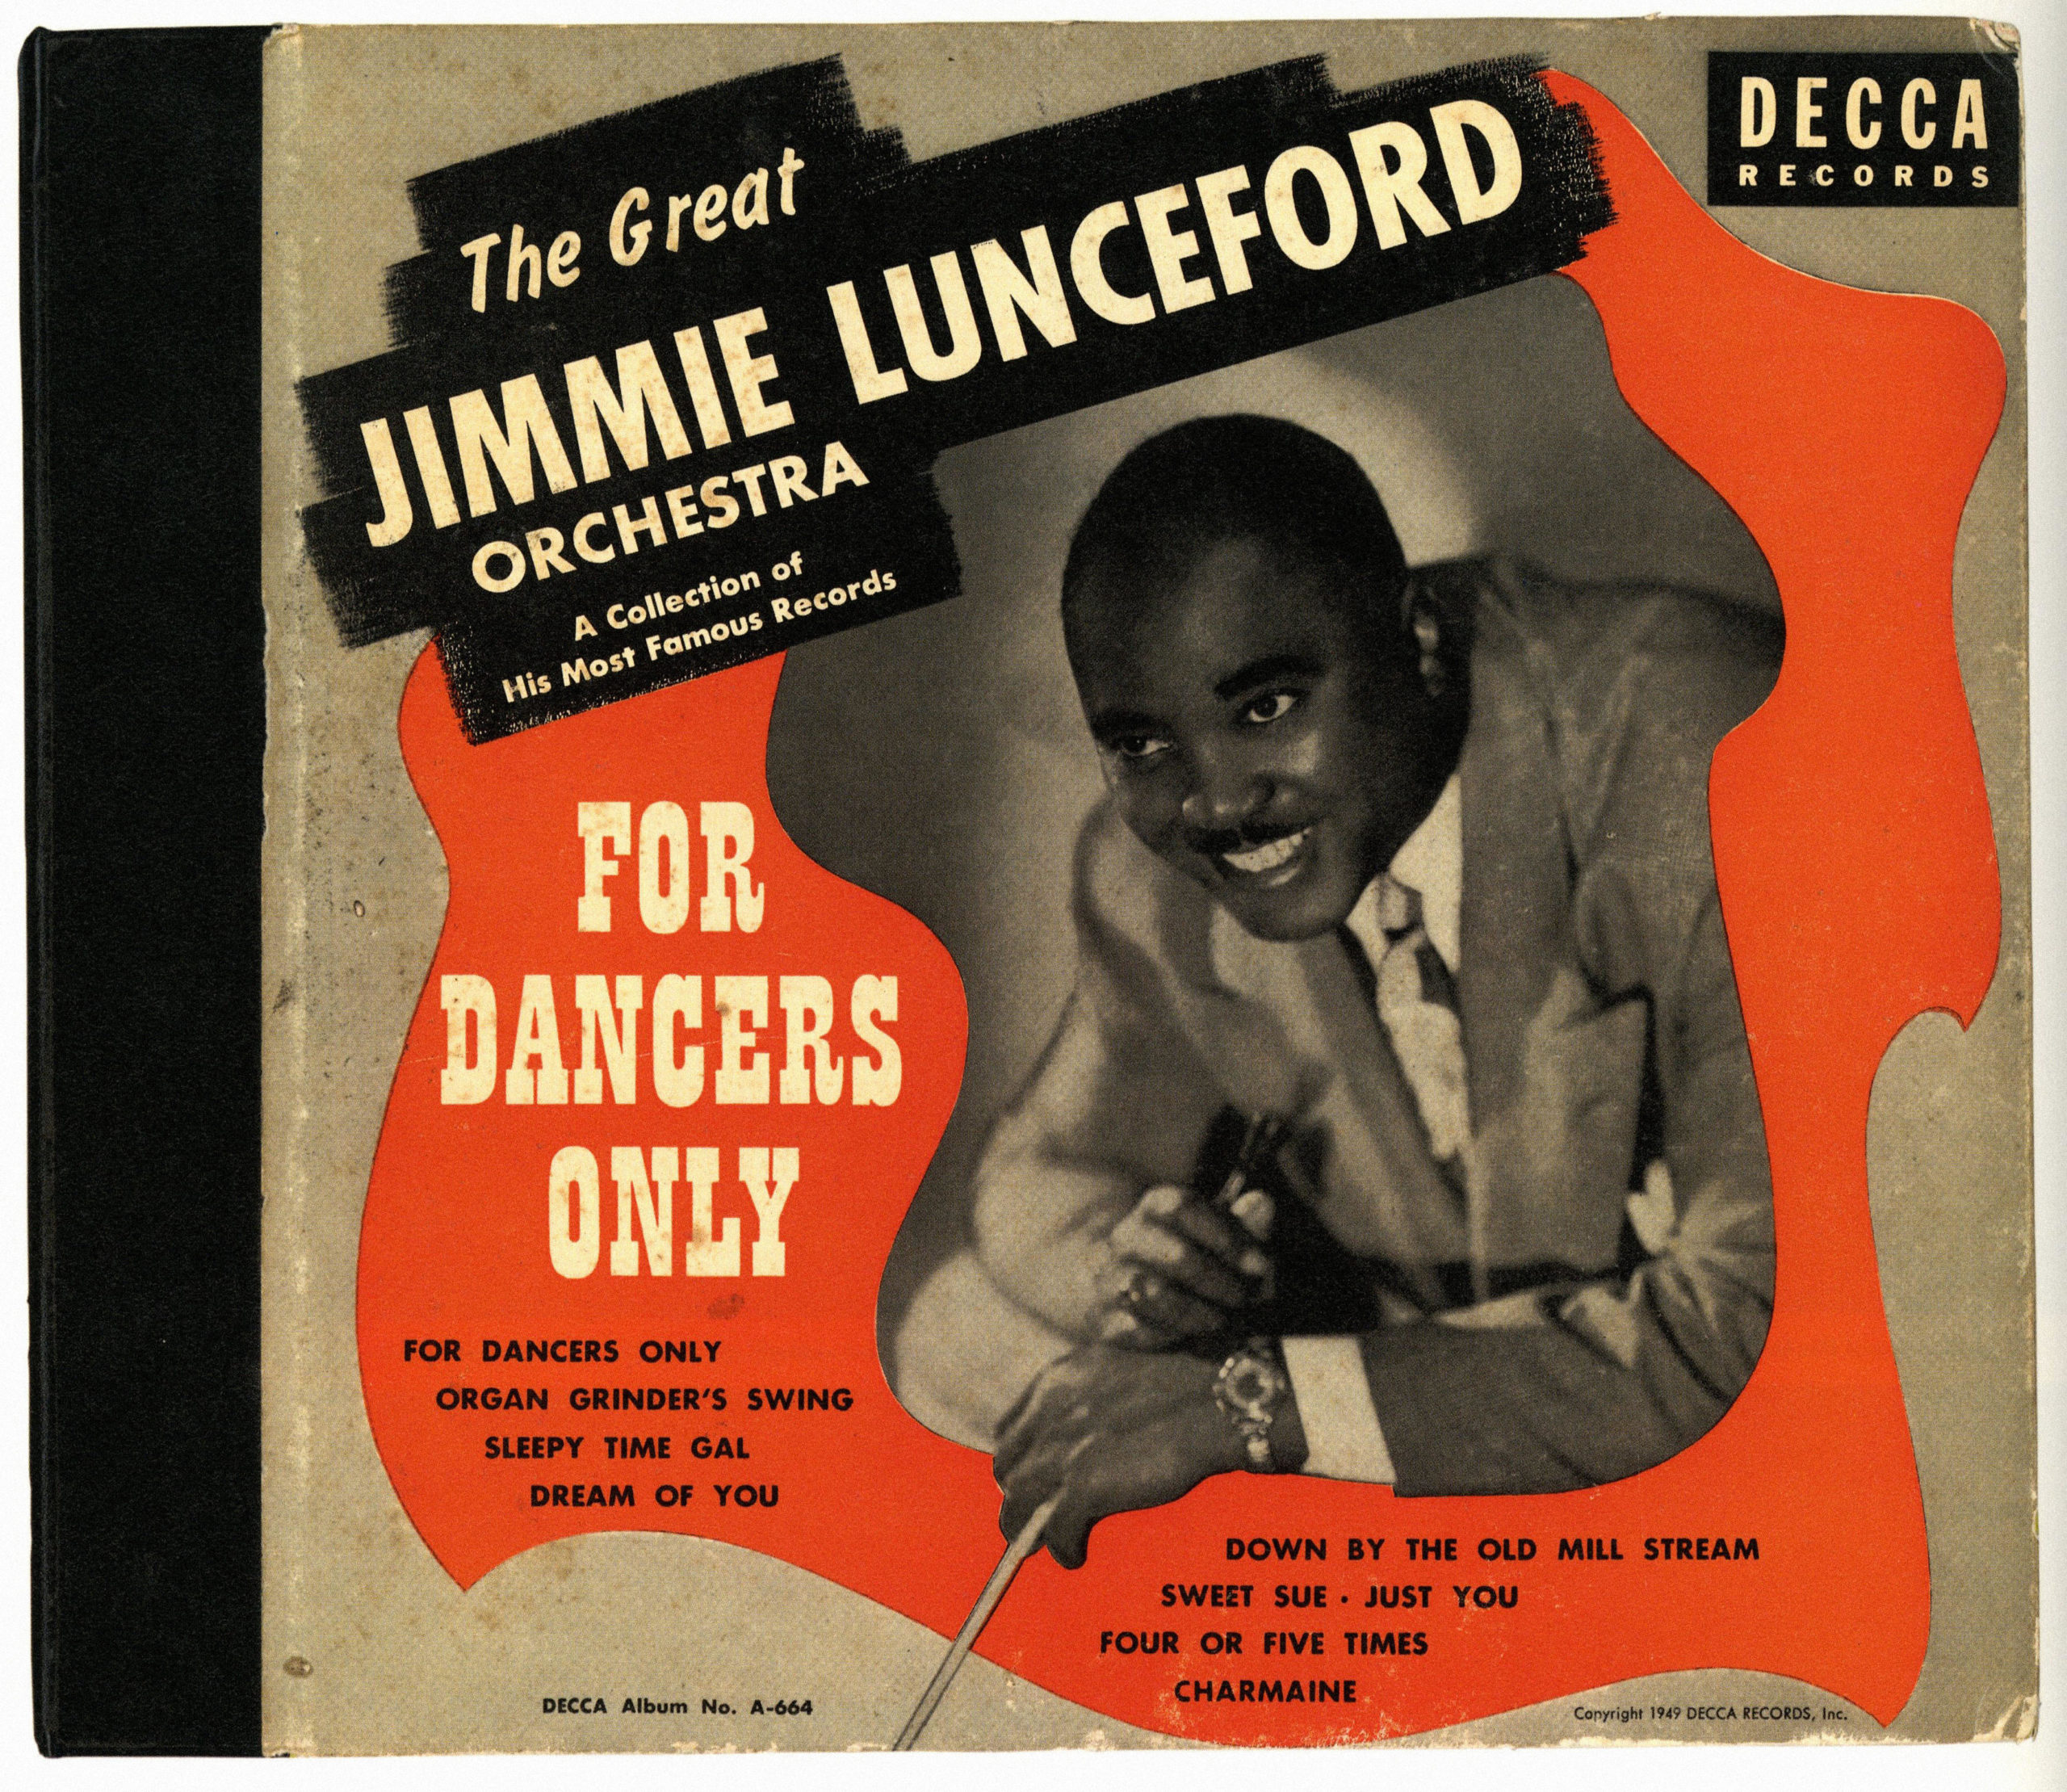 jimmie lunceford album "for dancers only"